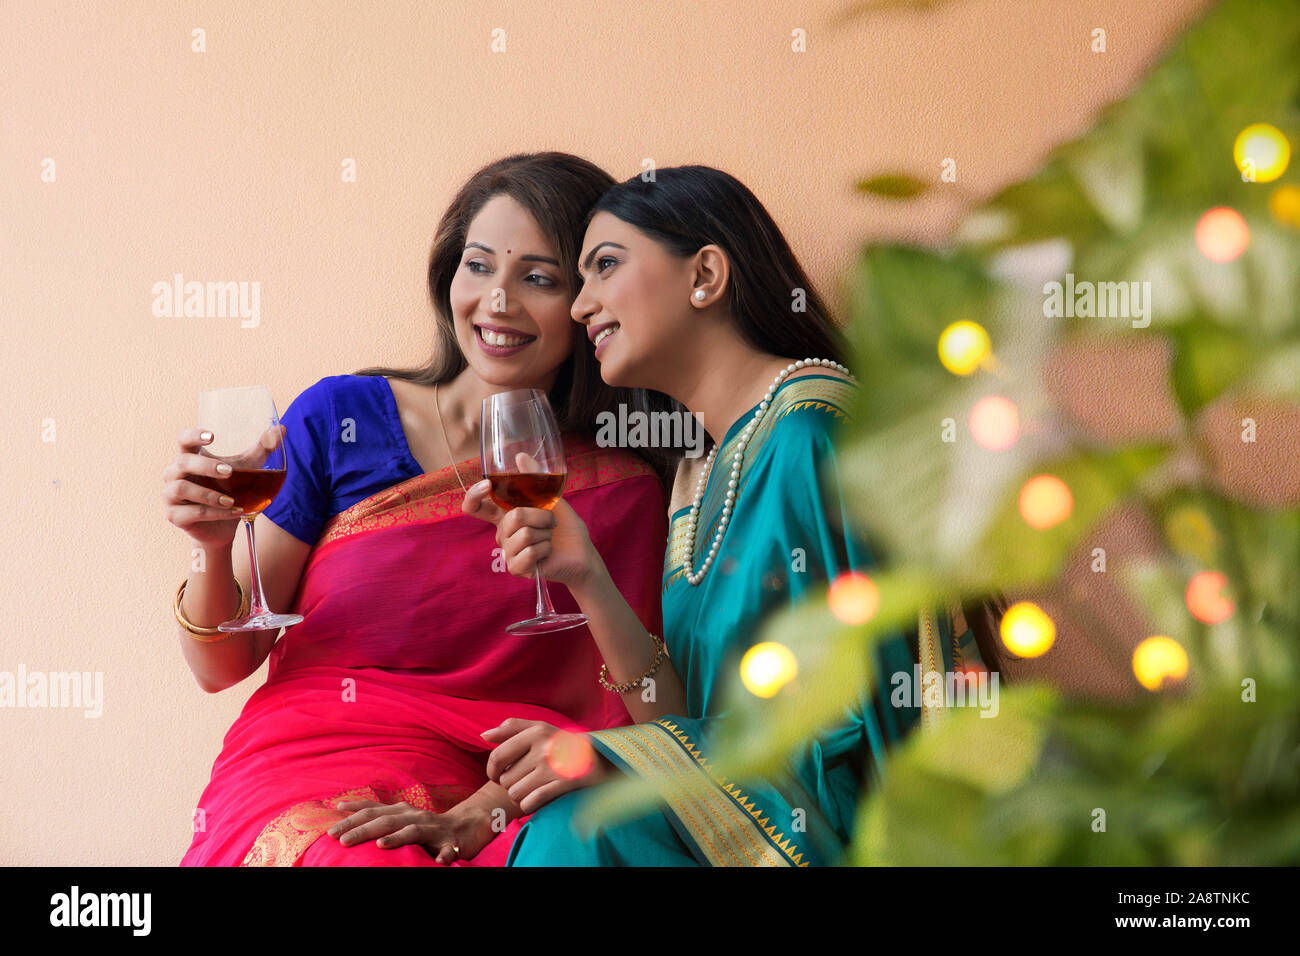 women in saree having a drink together Stock Photo